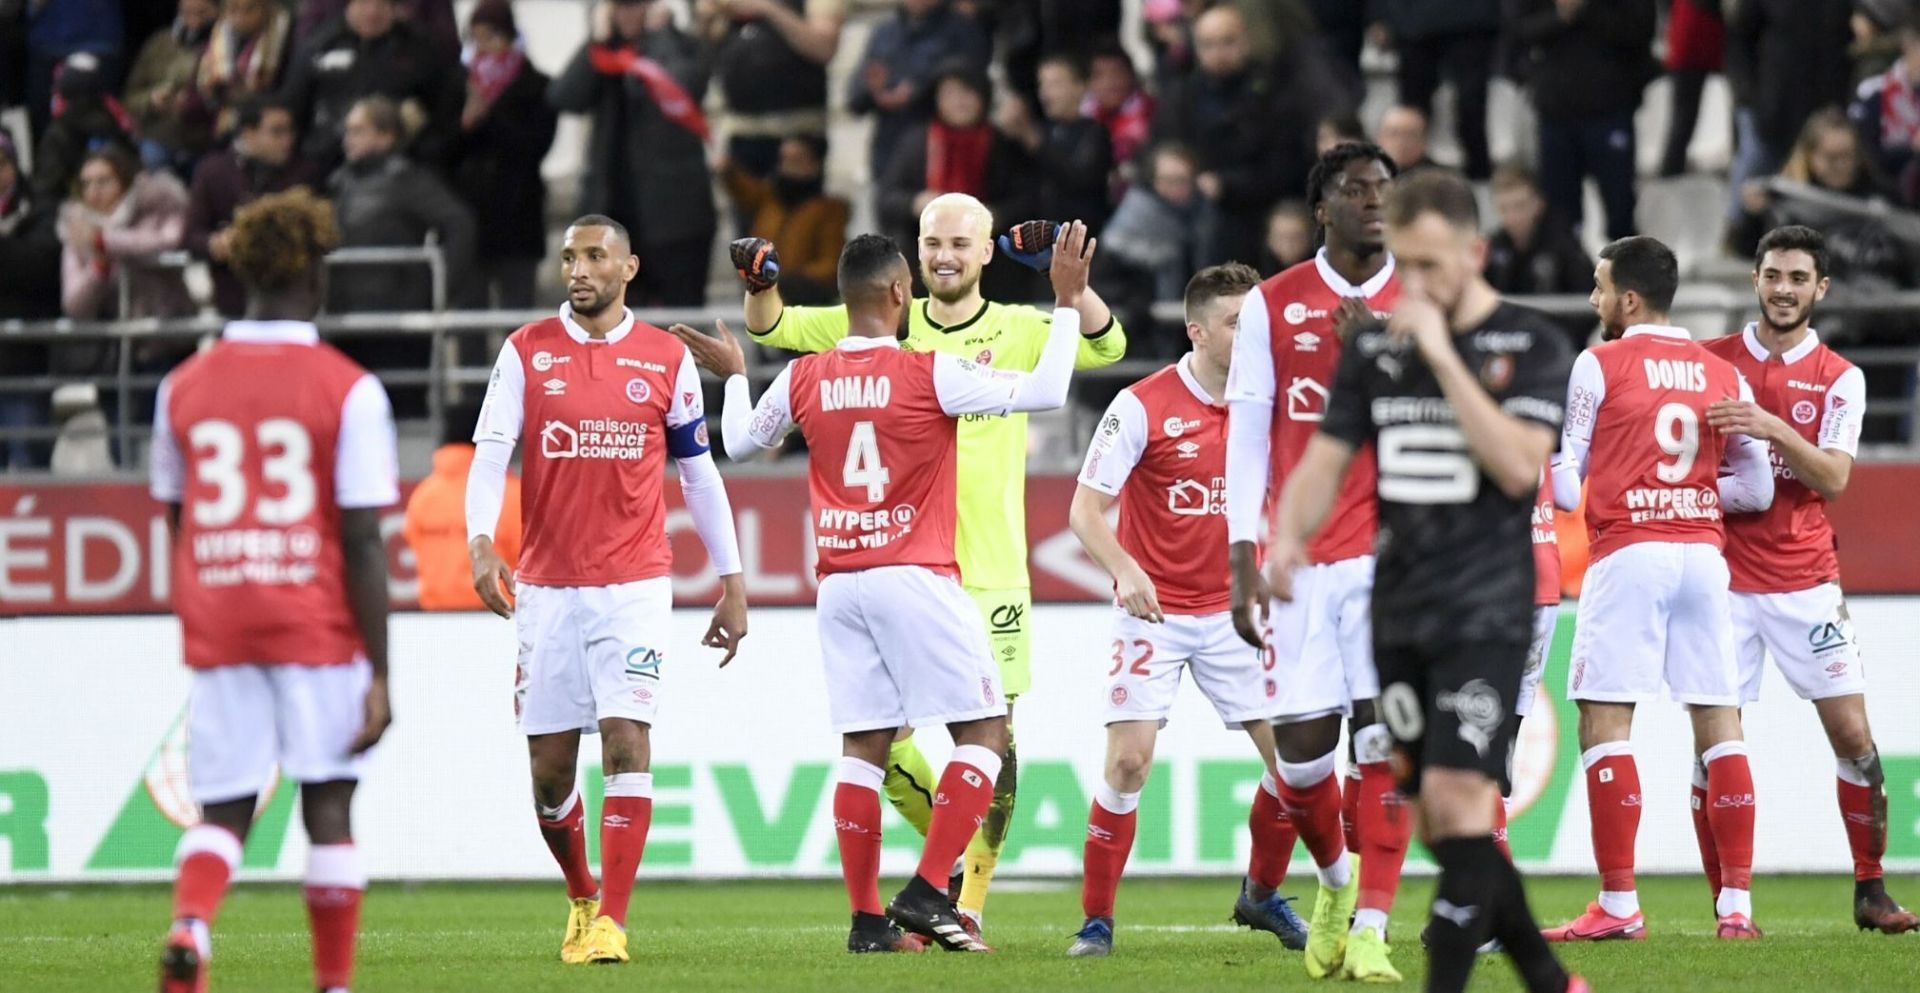 Can Reims continue their hot streak when they face off with Monaco this weekend?